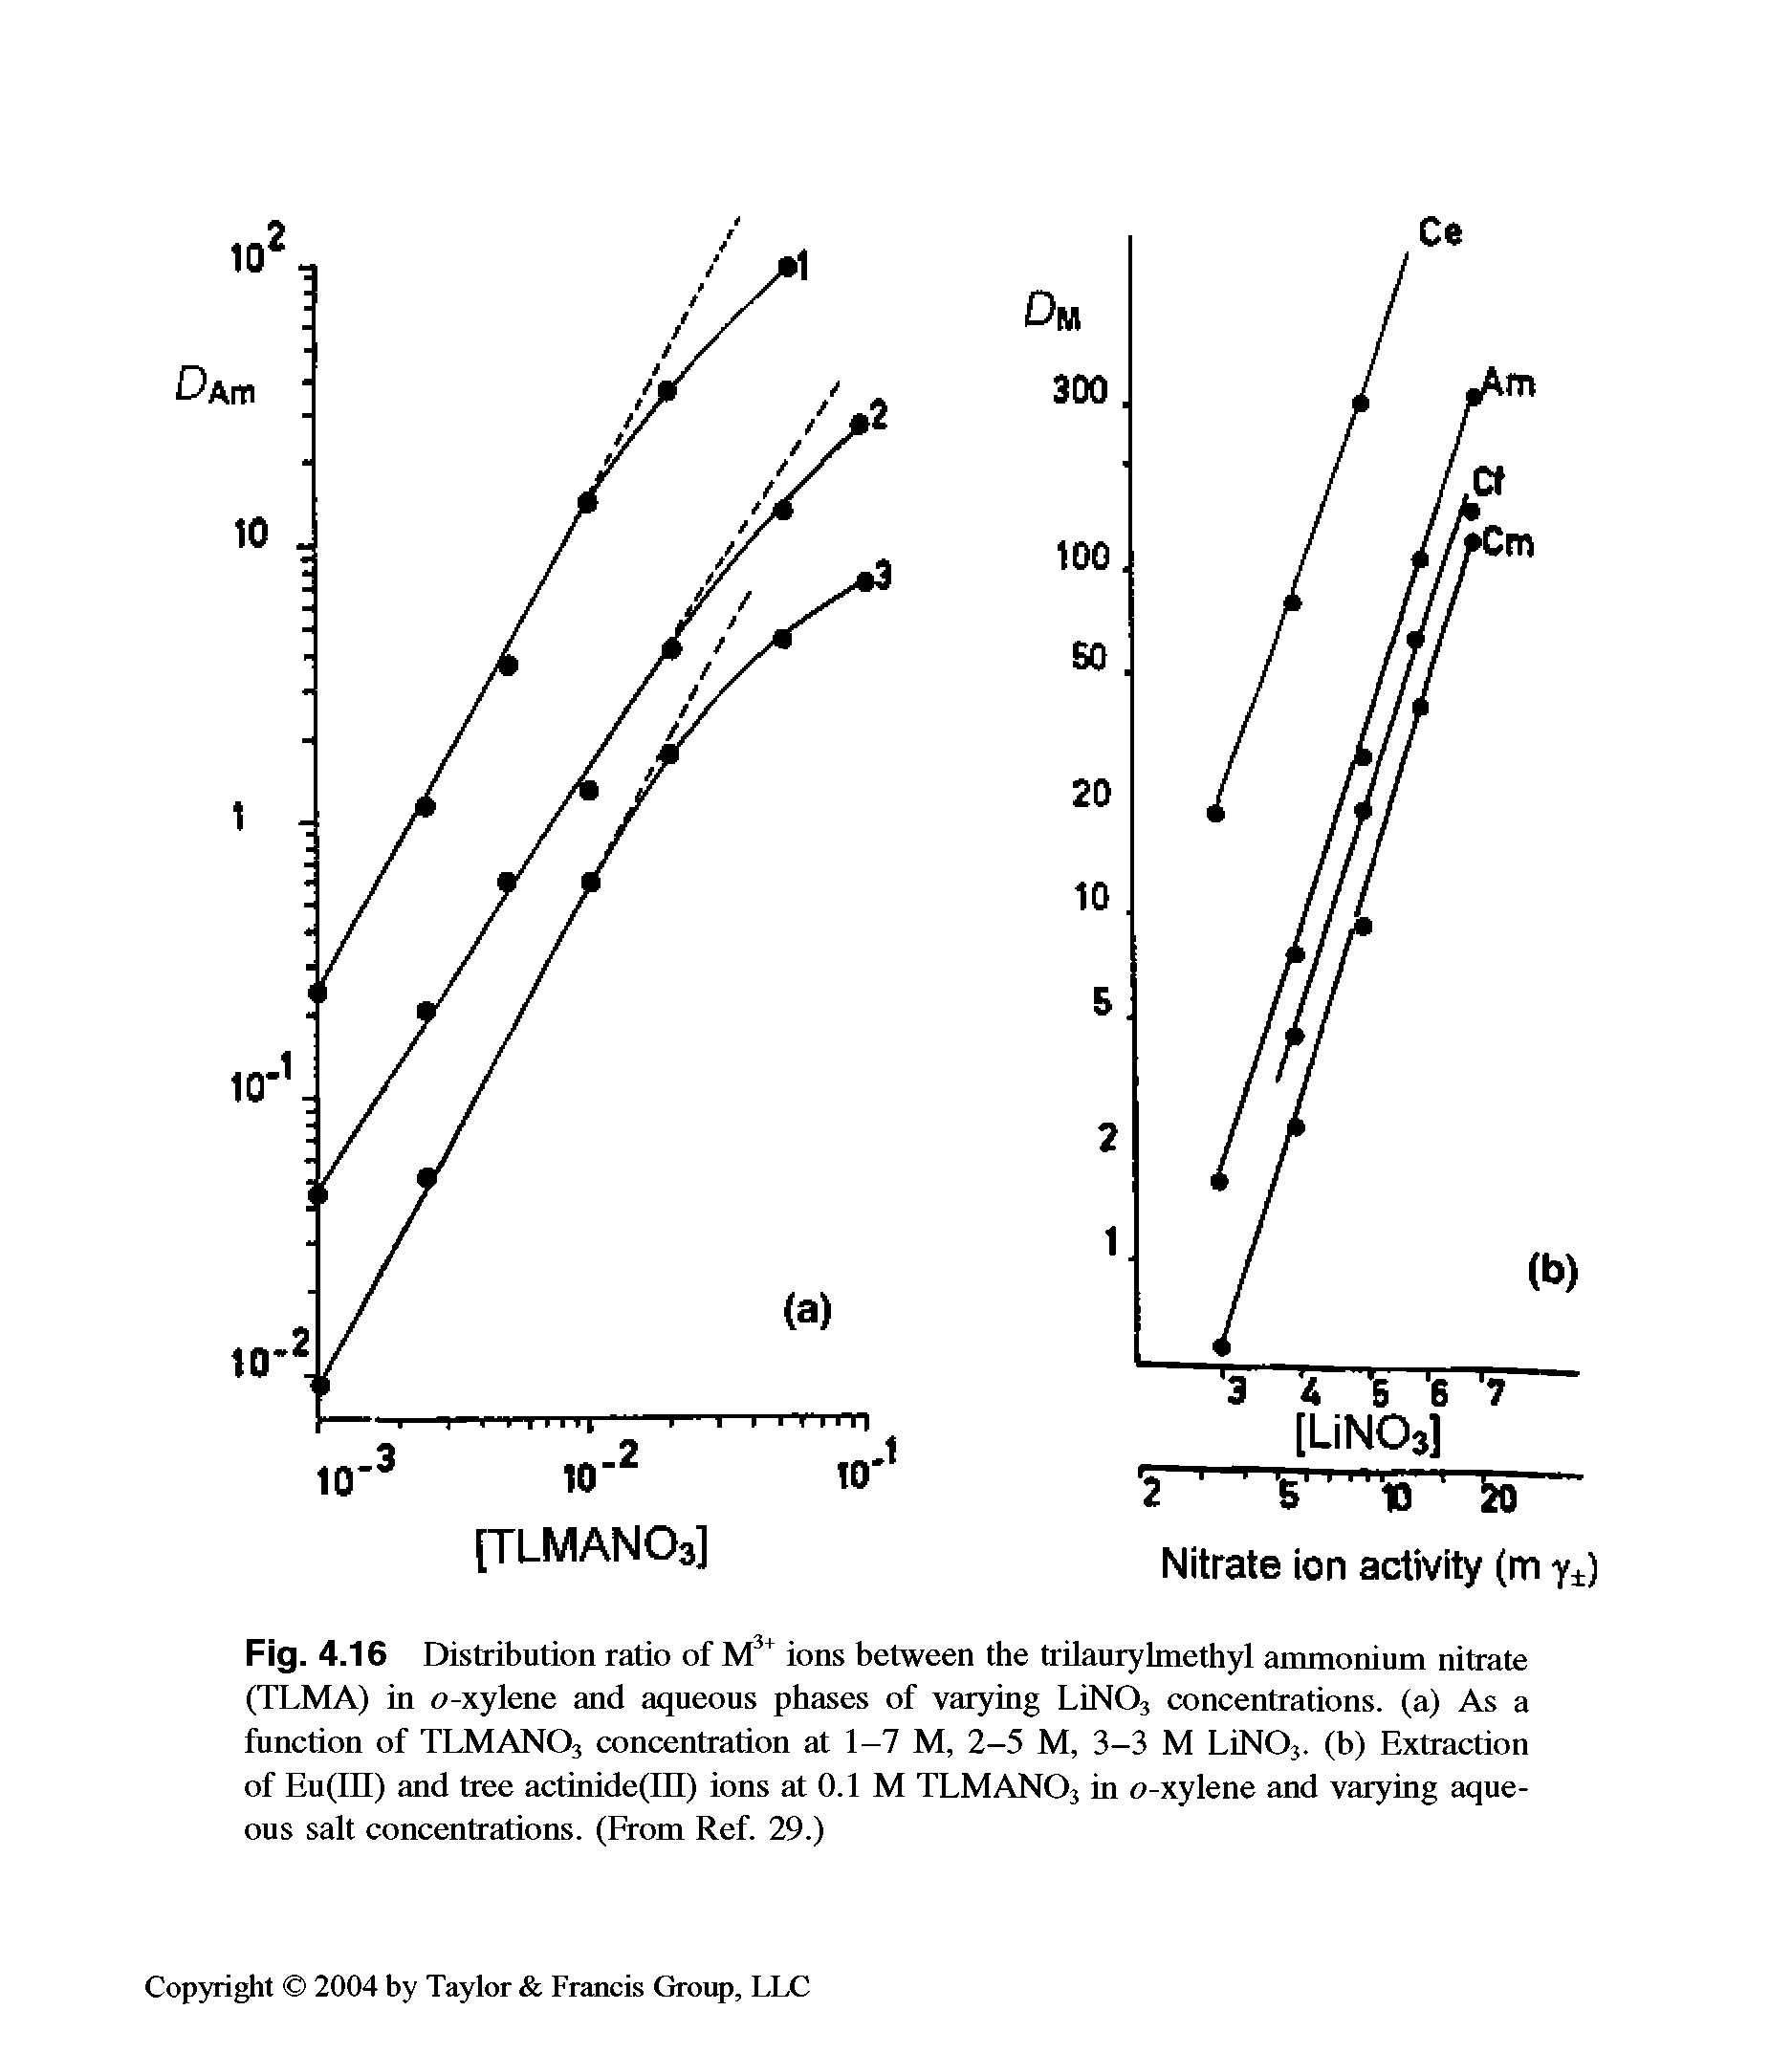 Fig. 4.16 Distribution ratio of ions between the trUaurylmethyl ammonium nitrate (TLMA) in o-xylene and aqueous phases of varying LiNOj concentrations, (a) As a function of TLMANO3 concentration at 1-7 M, 2-5 M, 3-3 M LiNOj. (b) Extraction of Eu(in) and tree actinide(III) ions at 0.1 M TLMANO3 in o-xylene and varying aqueous salt concentrations. (From Ref. 29.)...